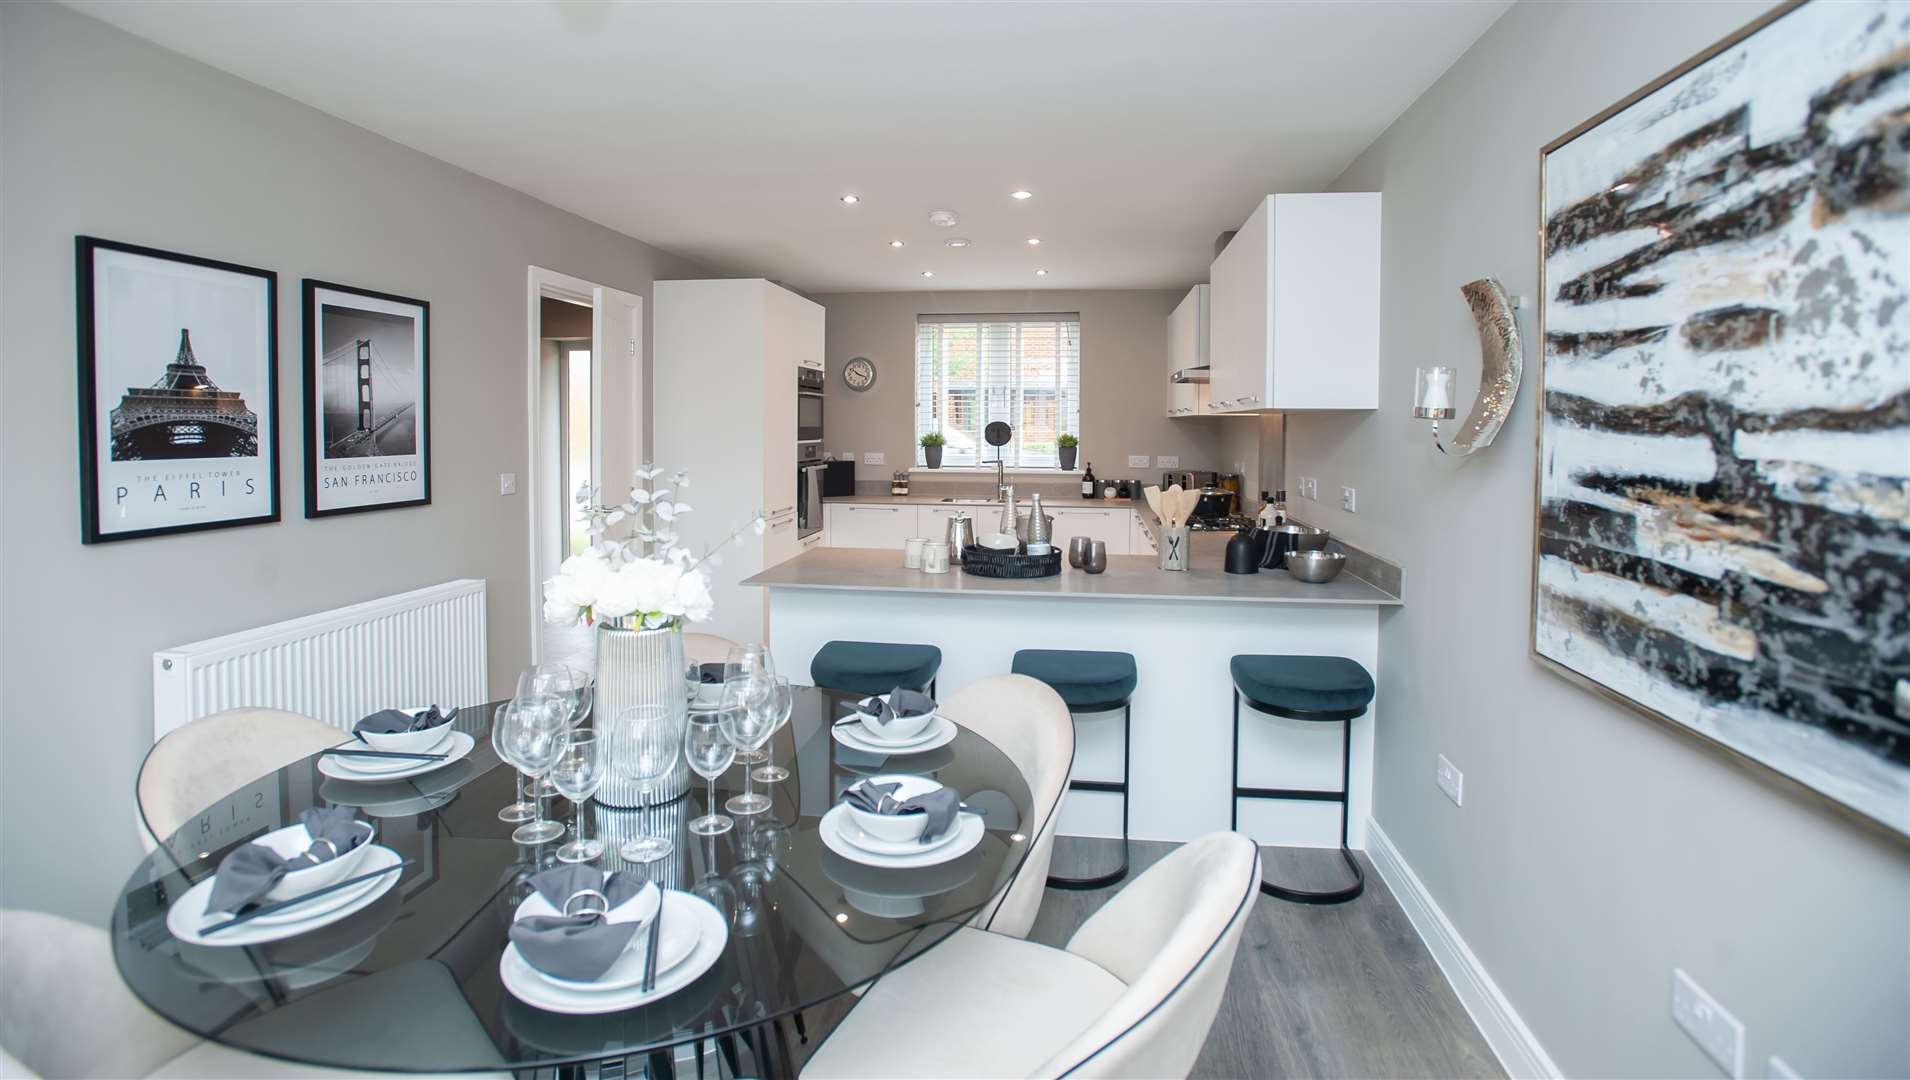 The kitchen/dining room of the Lancaster showhome at Bellway’s Blenheim Green development in Kings Hill.